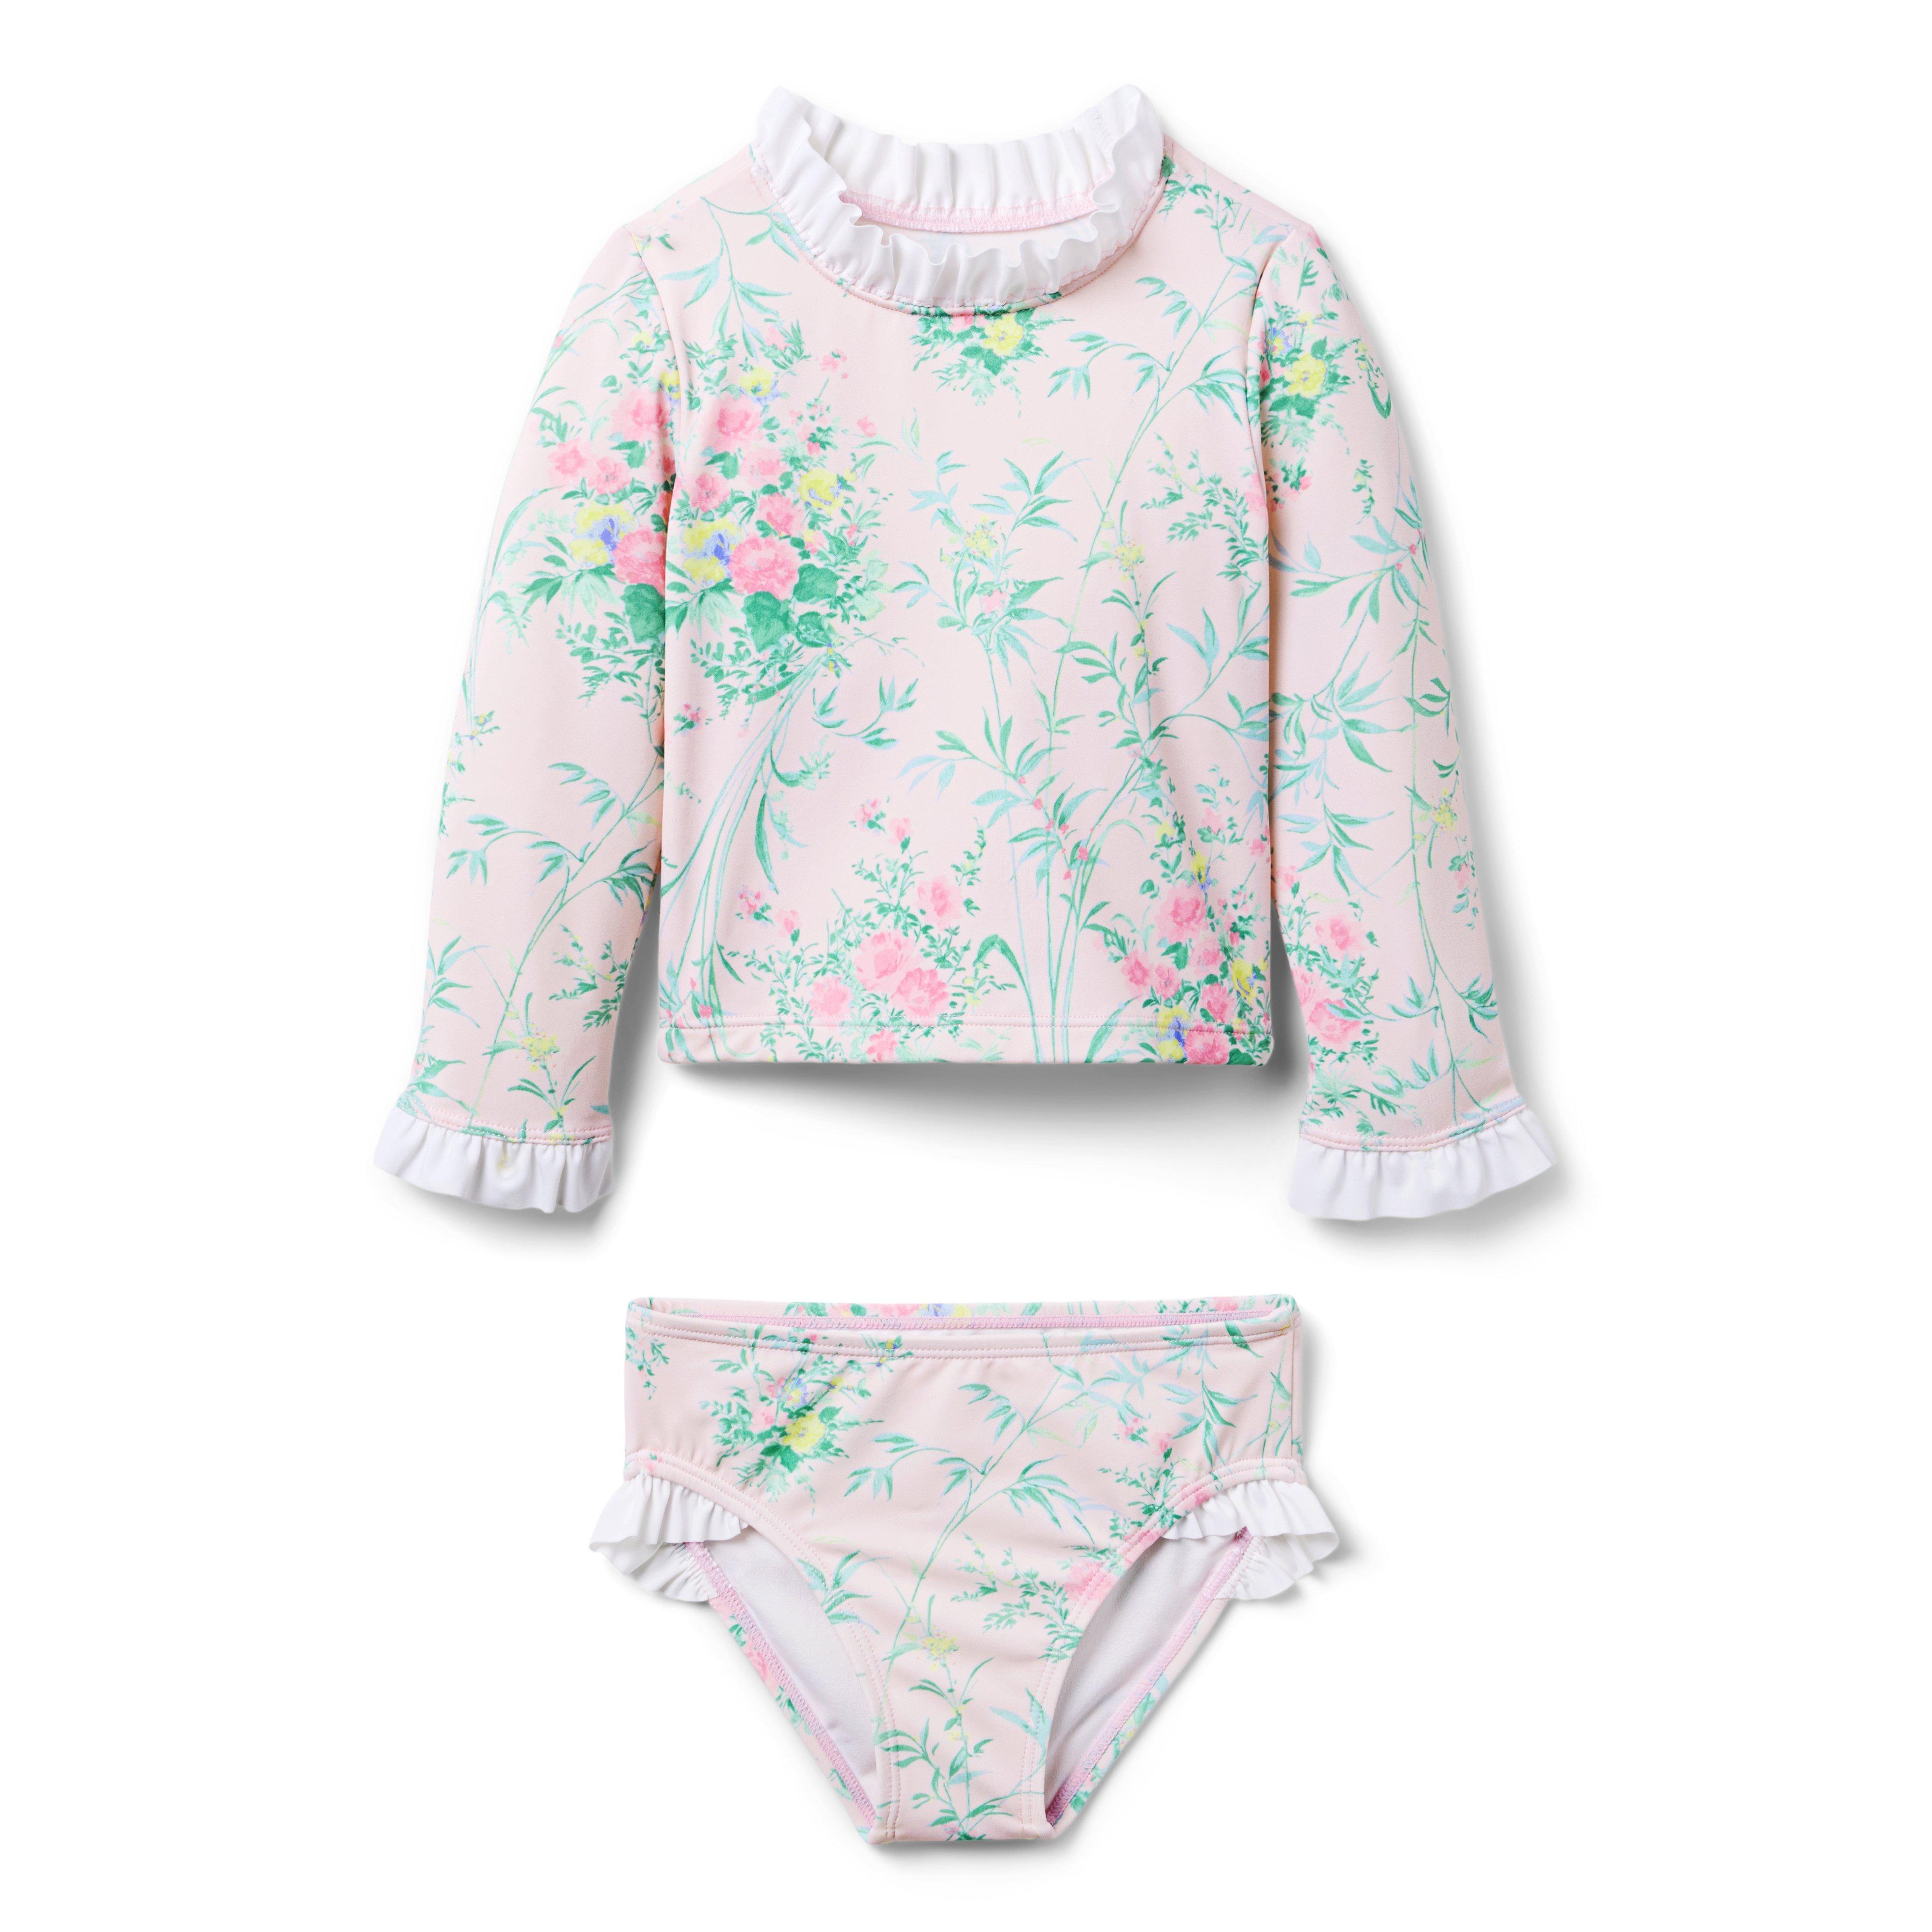 Recycled Floral Rash Guard Swimsuit